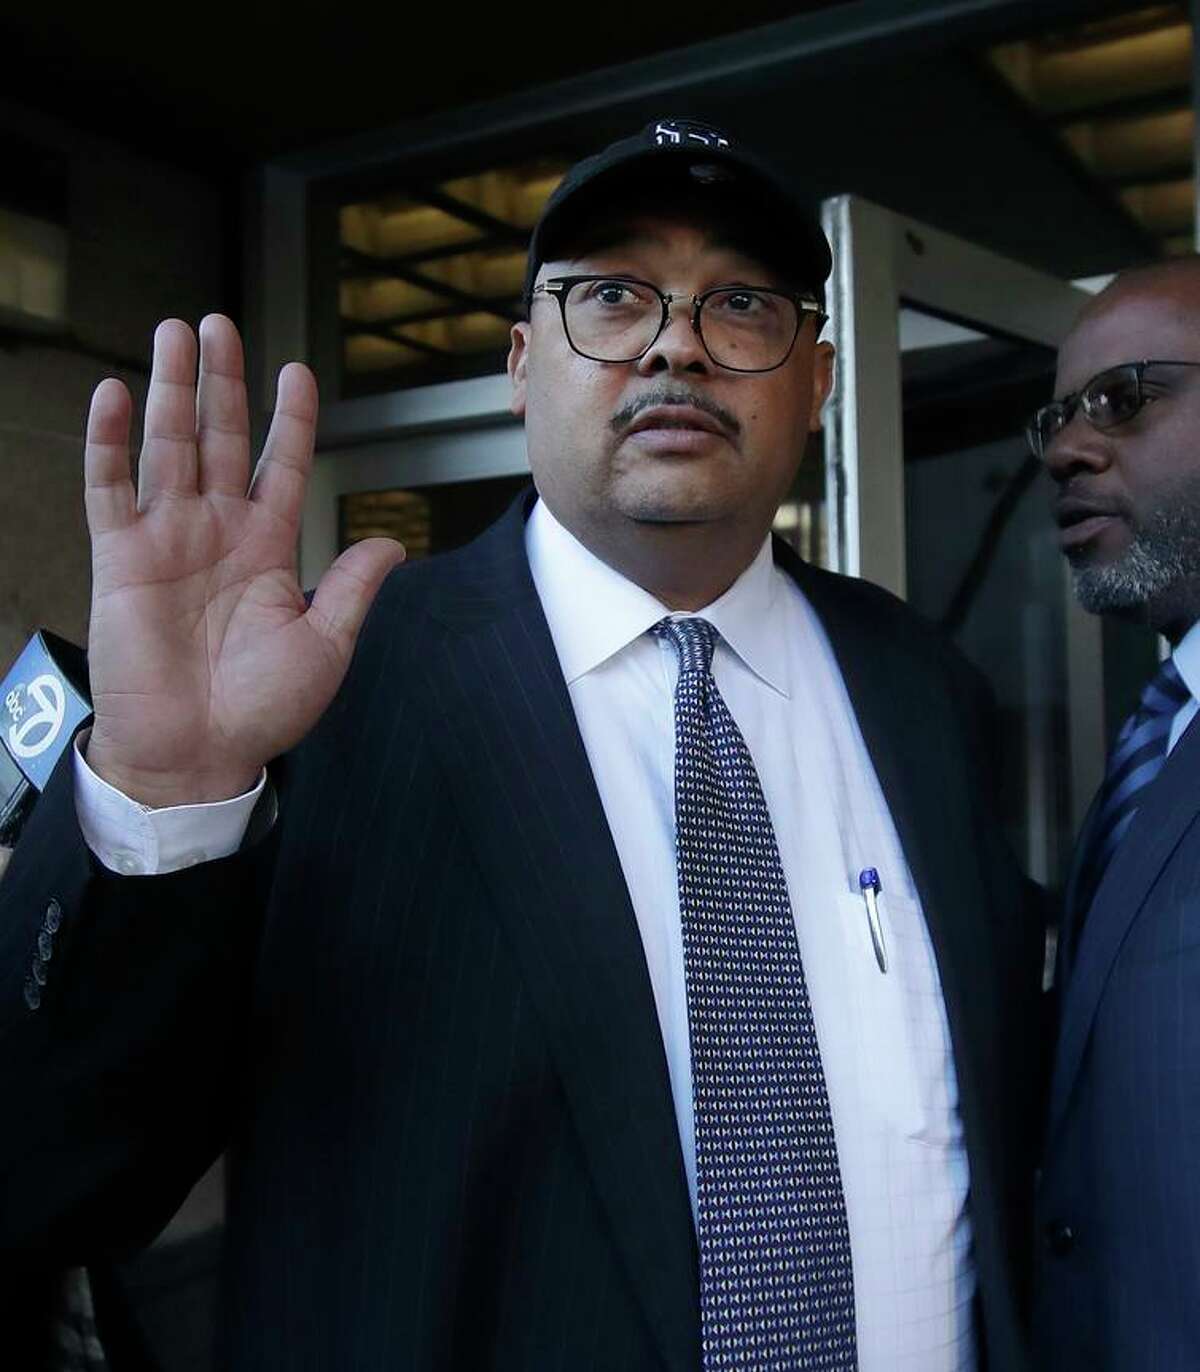 Former Public Works Director Mohammed Nuru (center), who pleaded guilty to accepting bribes from contractors. leaves federal courthouse in San Francisco with attorney Ismail Ramsey in 2020.